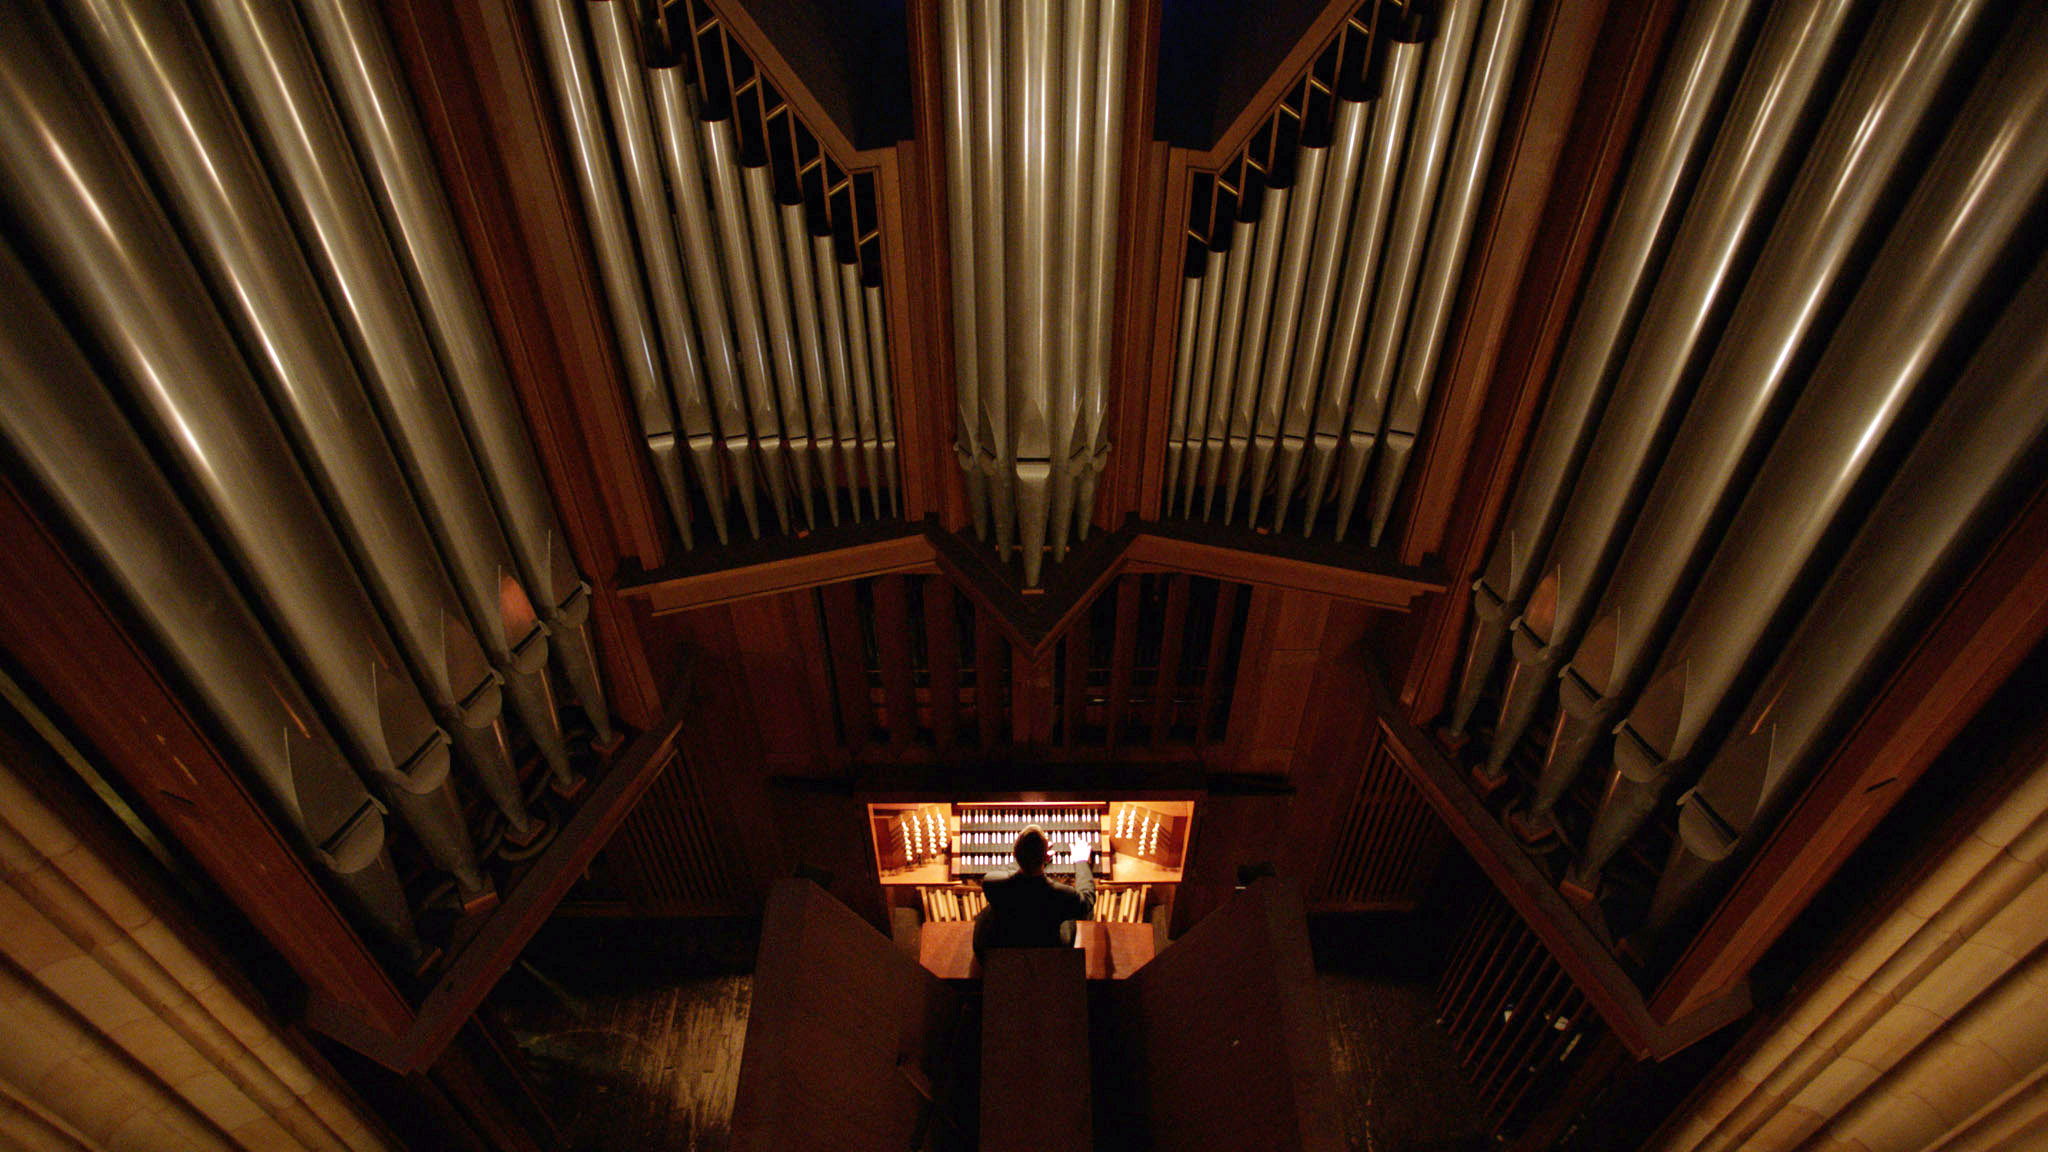 A student playing the organ